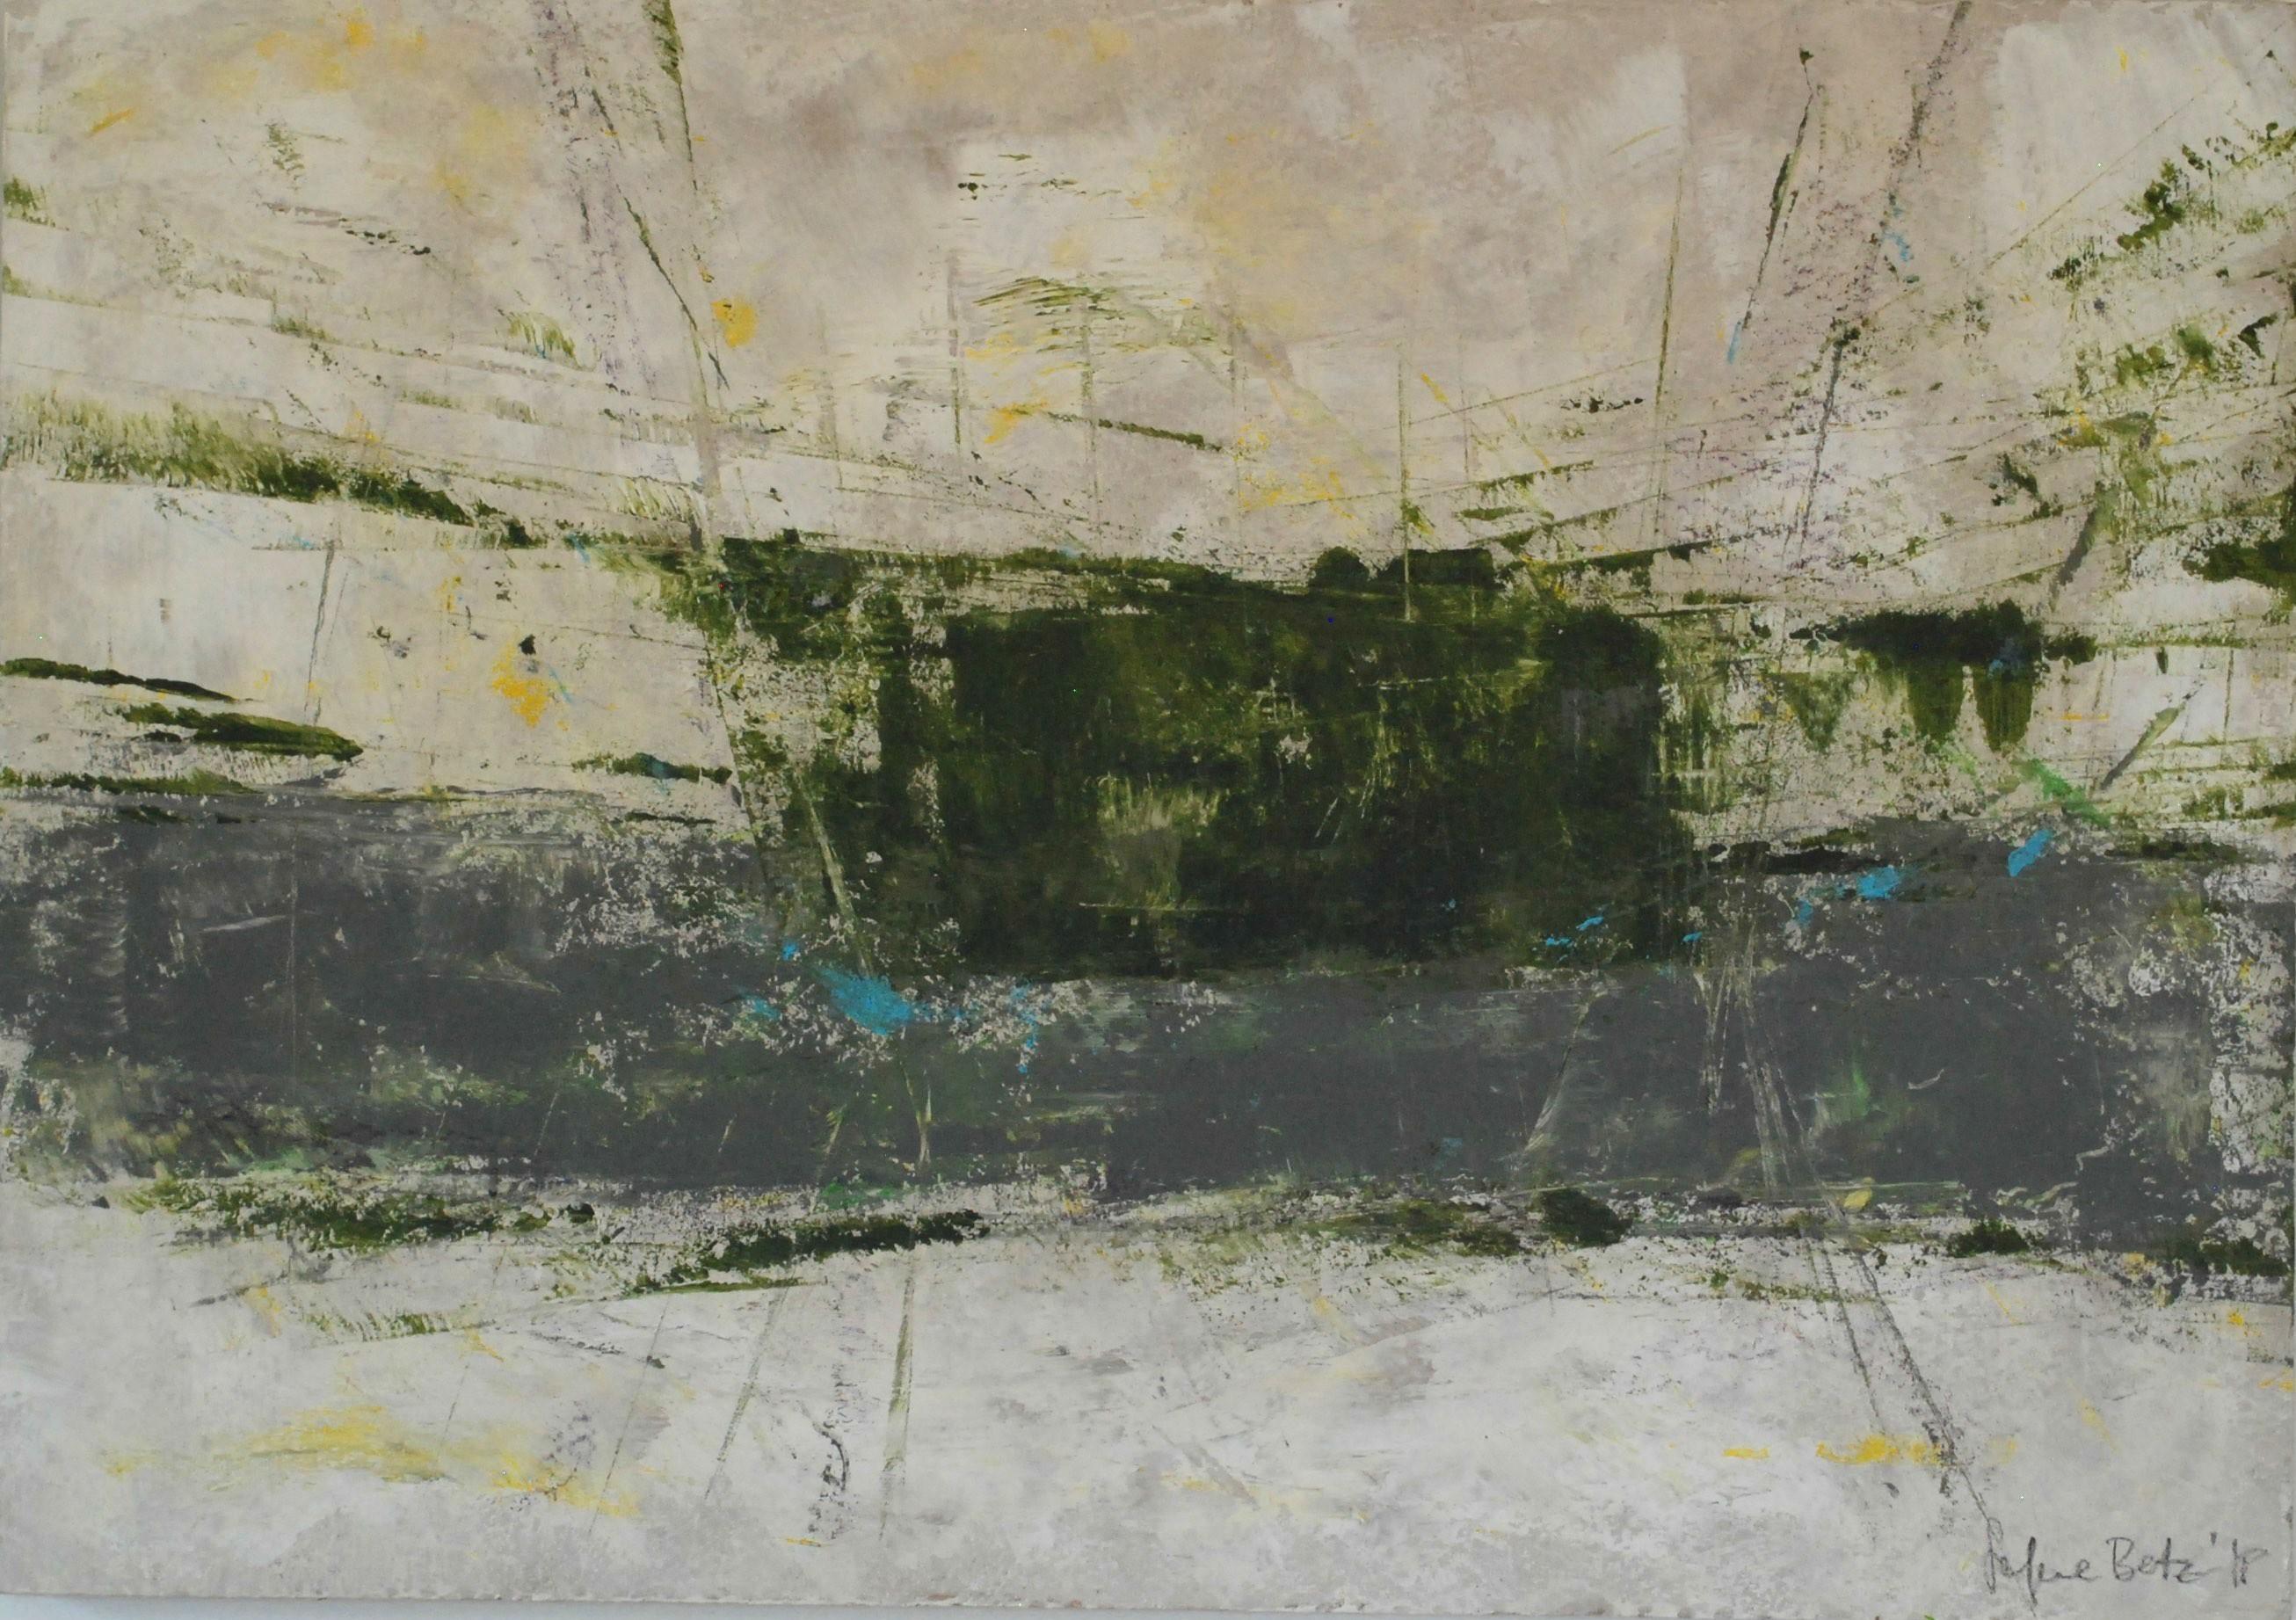 Green Explosion I - Painting by Stefanie Betz